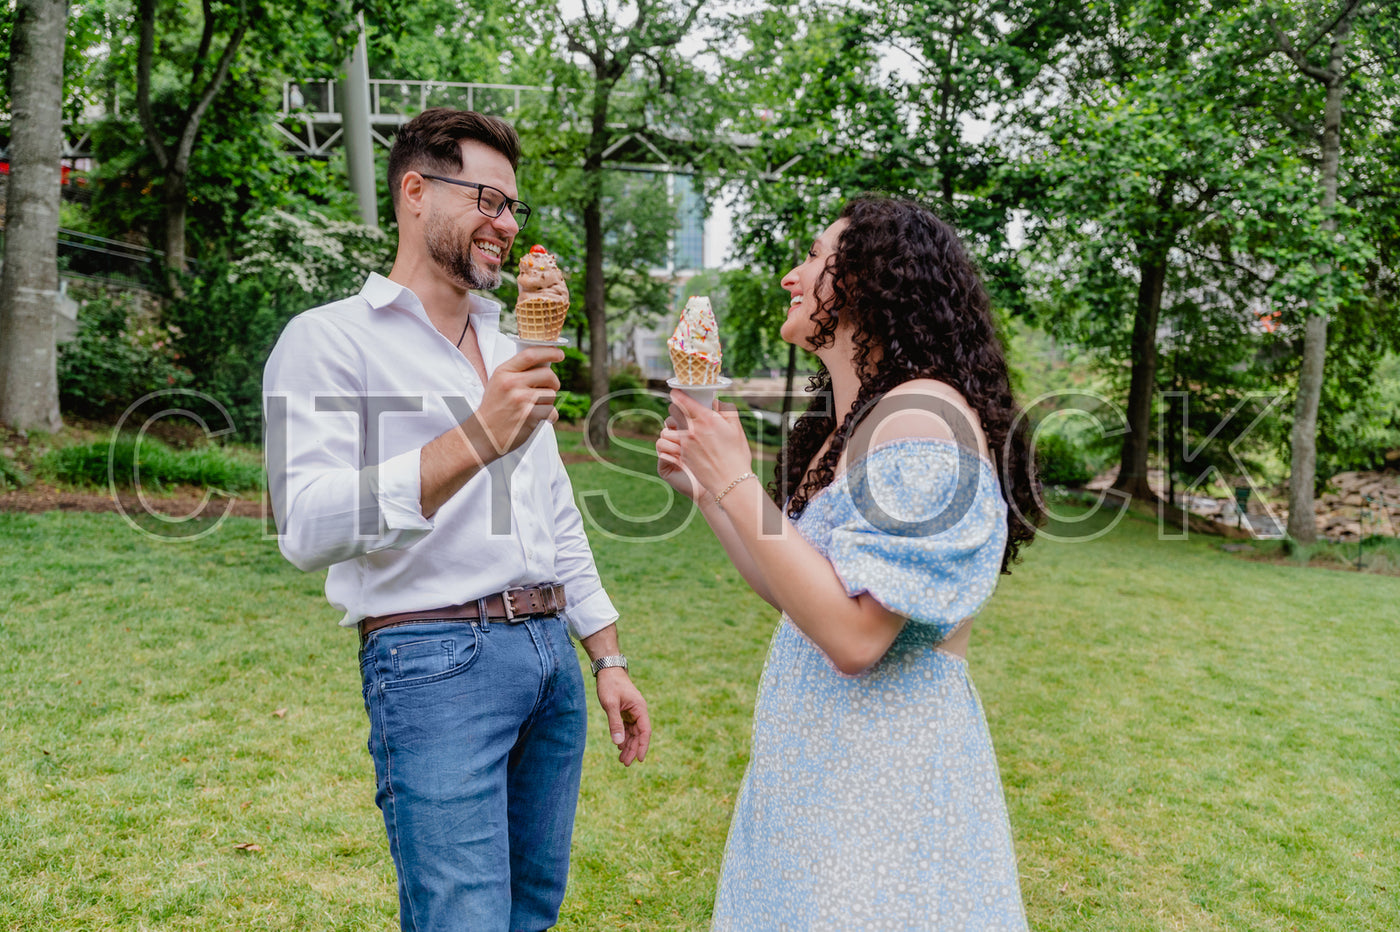 Couple laughing with ice cream in Greenville park